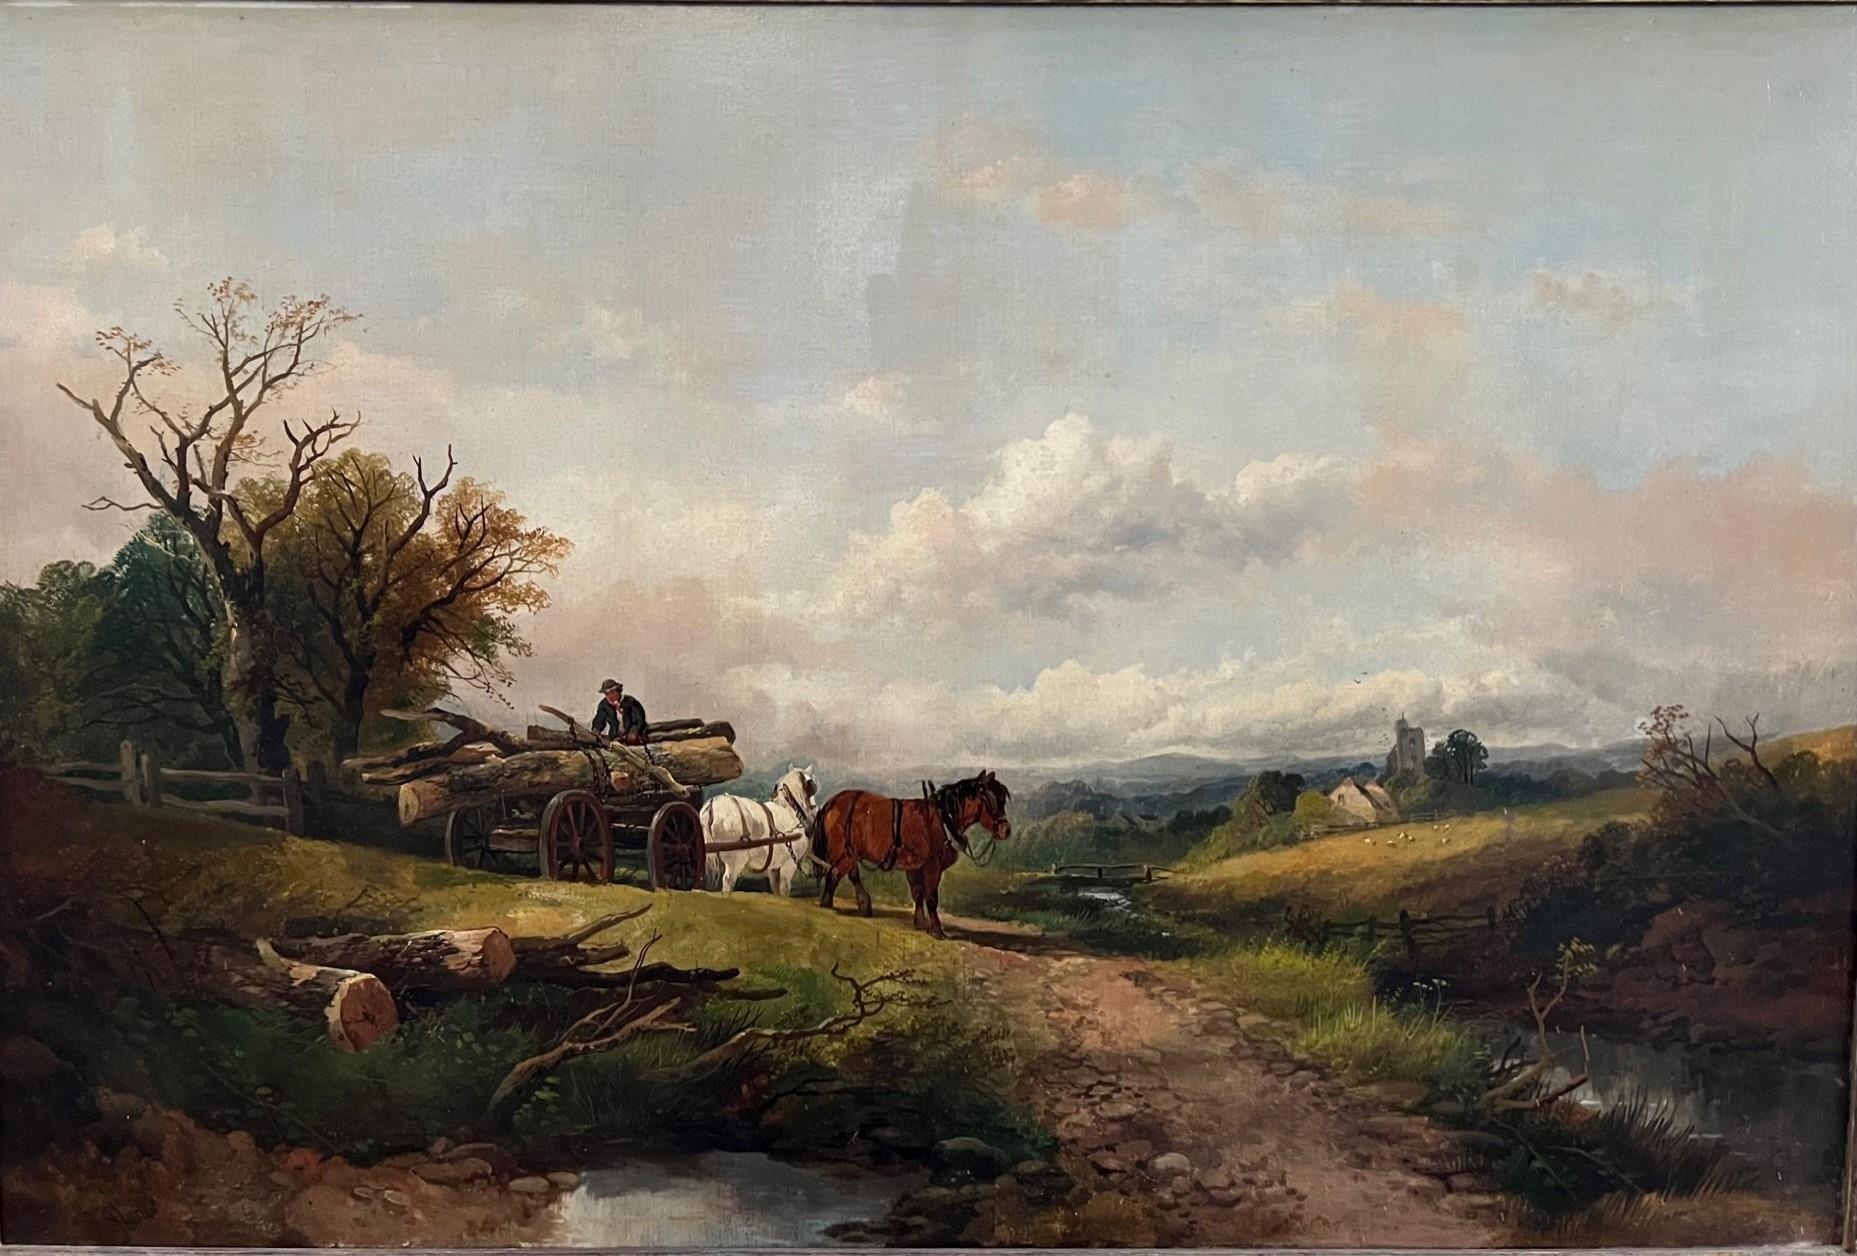 FOLLOWER OF JOHN CONSTABLE, A LARGE 19TH CENTURY OIL ON CANVAS River landscape, work horses